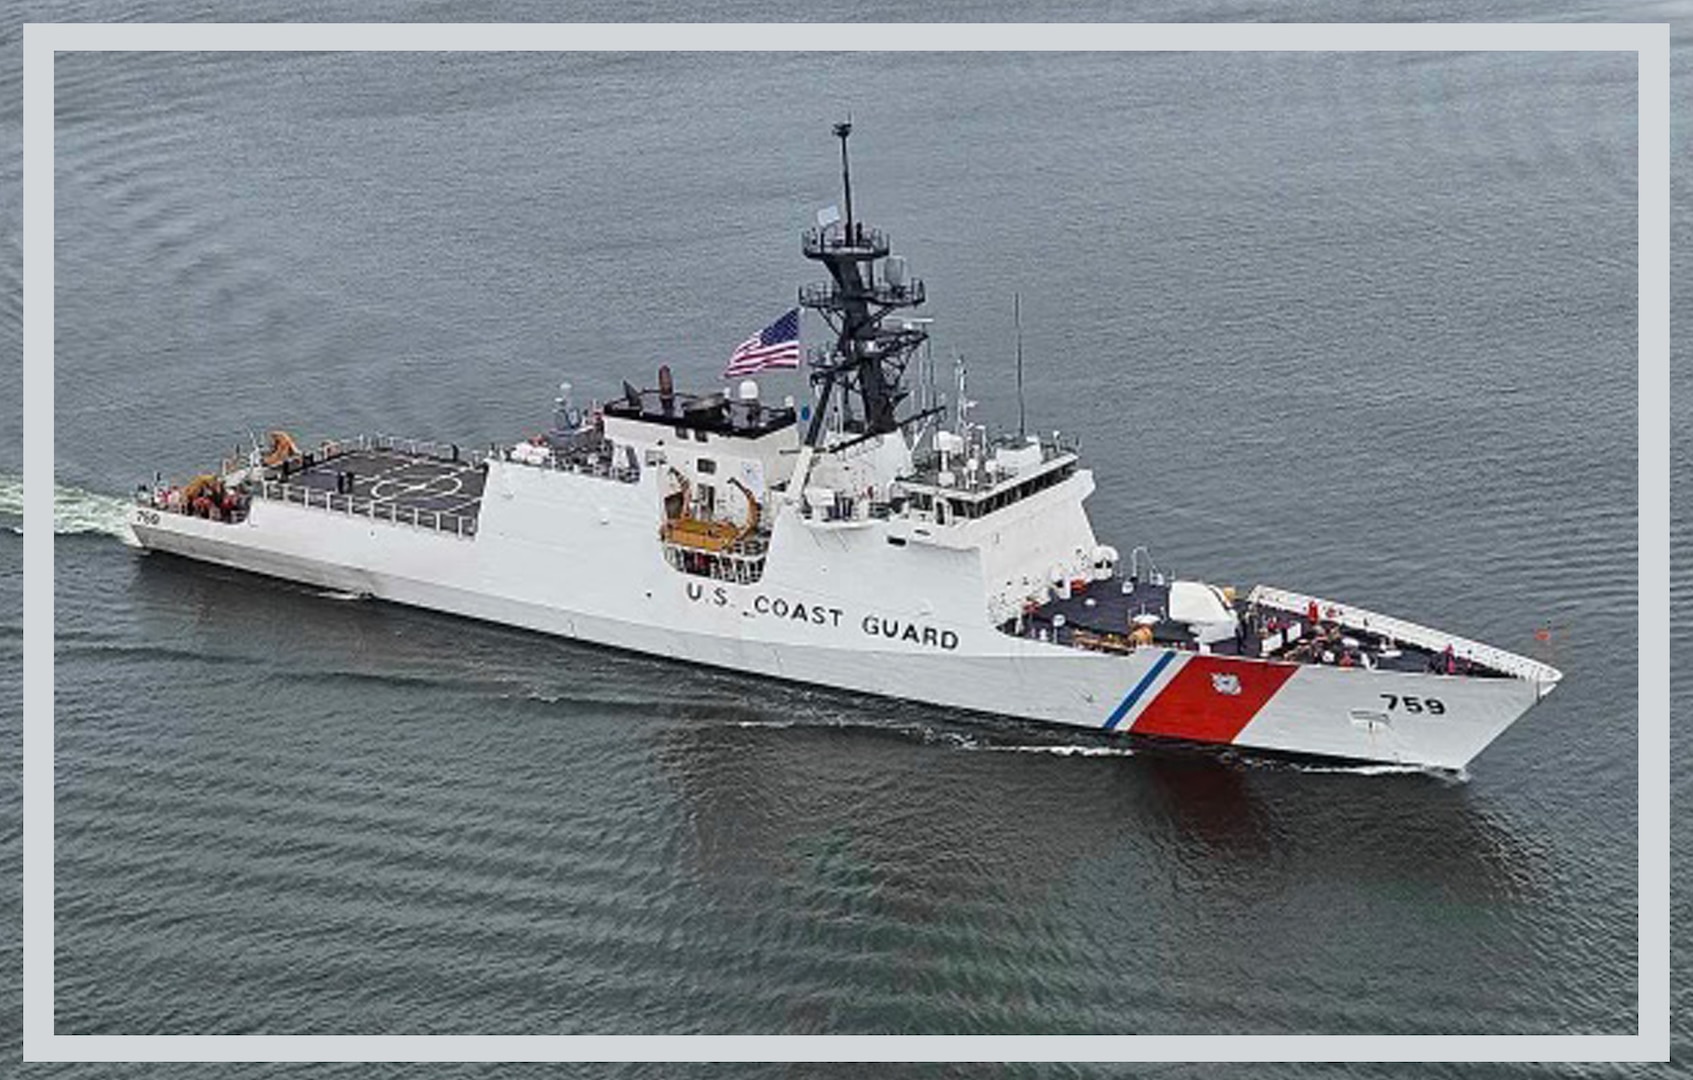 The crew of the U.S. Coast Guard Cutter Calhoun (WMSL 759) en route to their homeport in North Charleston, Dec. 3, 2023, after delivery from Ingalls Shipbuilding and supporting missions throughout the Coast Guard’s Seventh and Eighth districts. Calhoun is named to honor the first Master Chief Petty Officer of the Coast Guard, Charles L. Calhoun, who was from Ocean City, Maryland. (U.S. Coast Guard photo courtesy of Coast Guard Air Station Savannah)